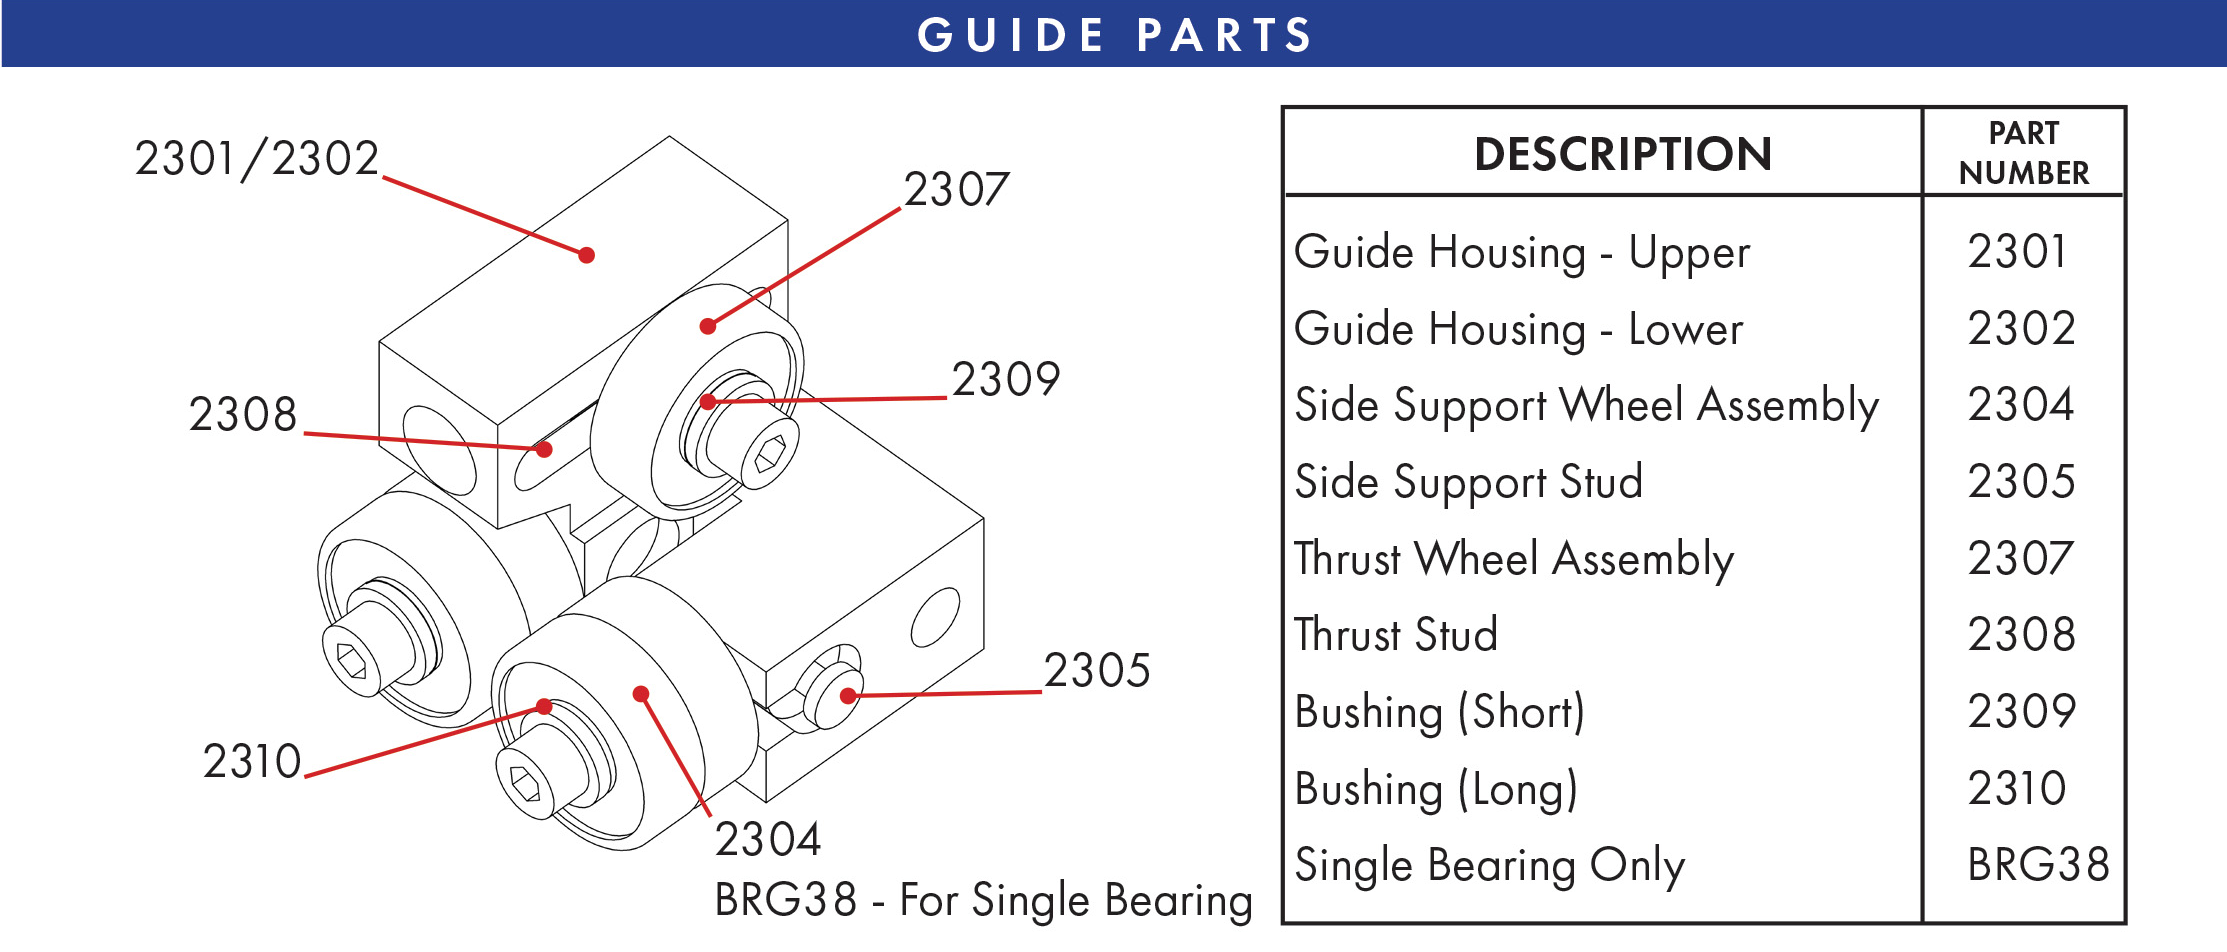 2300 Band Saw Guide Parts